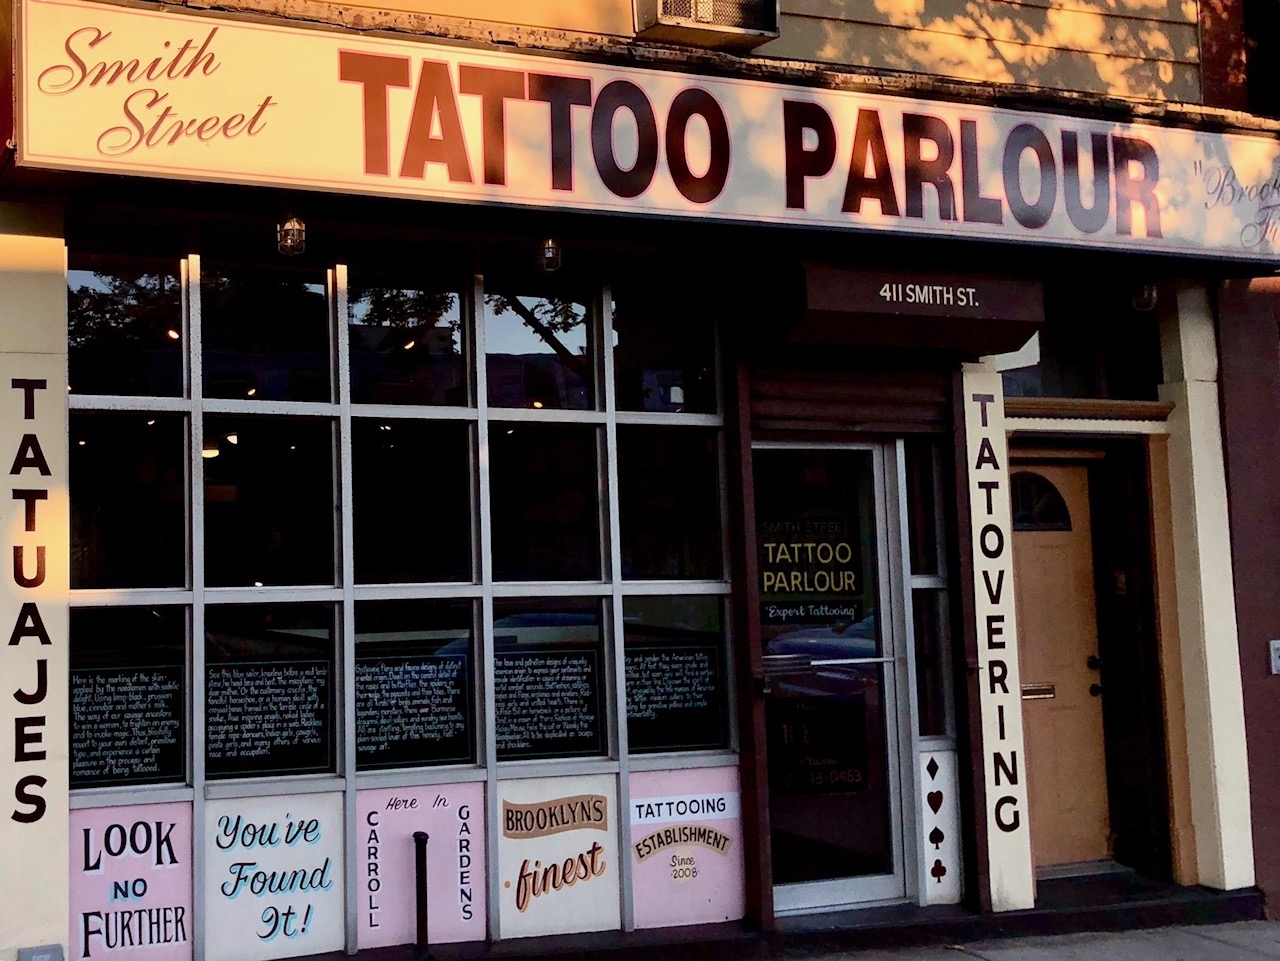 About — Smith Street Tattoo Parlour